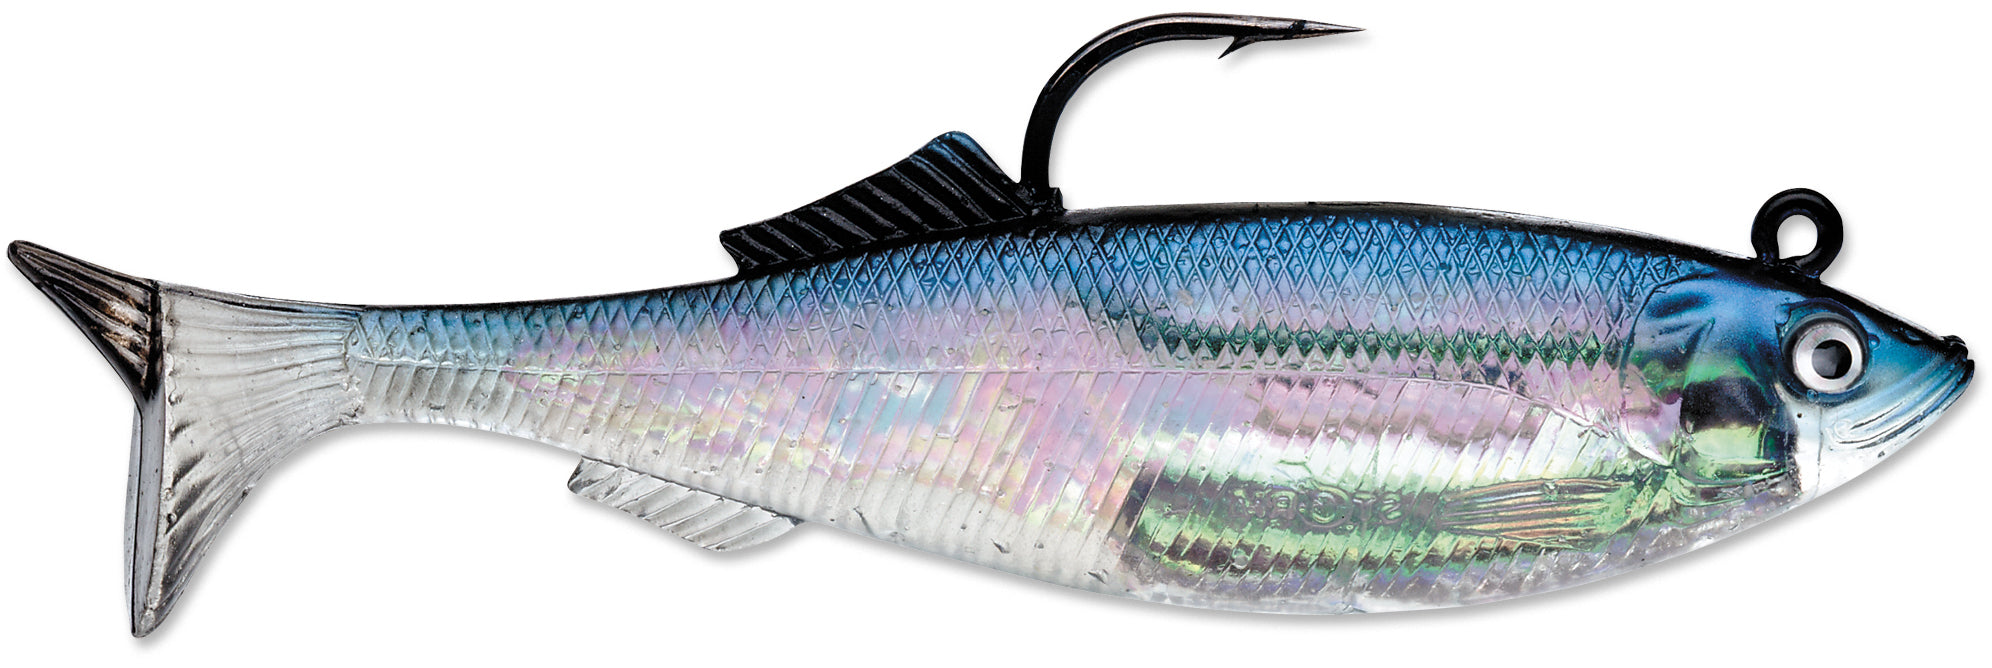 Storm WildEye Live Rainbow Trout Fishing Lures (3-Pack) 5/16 oz | 4